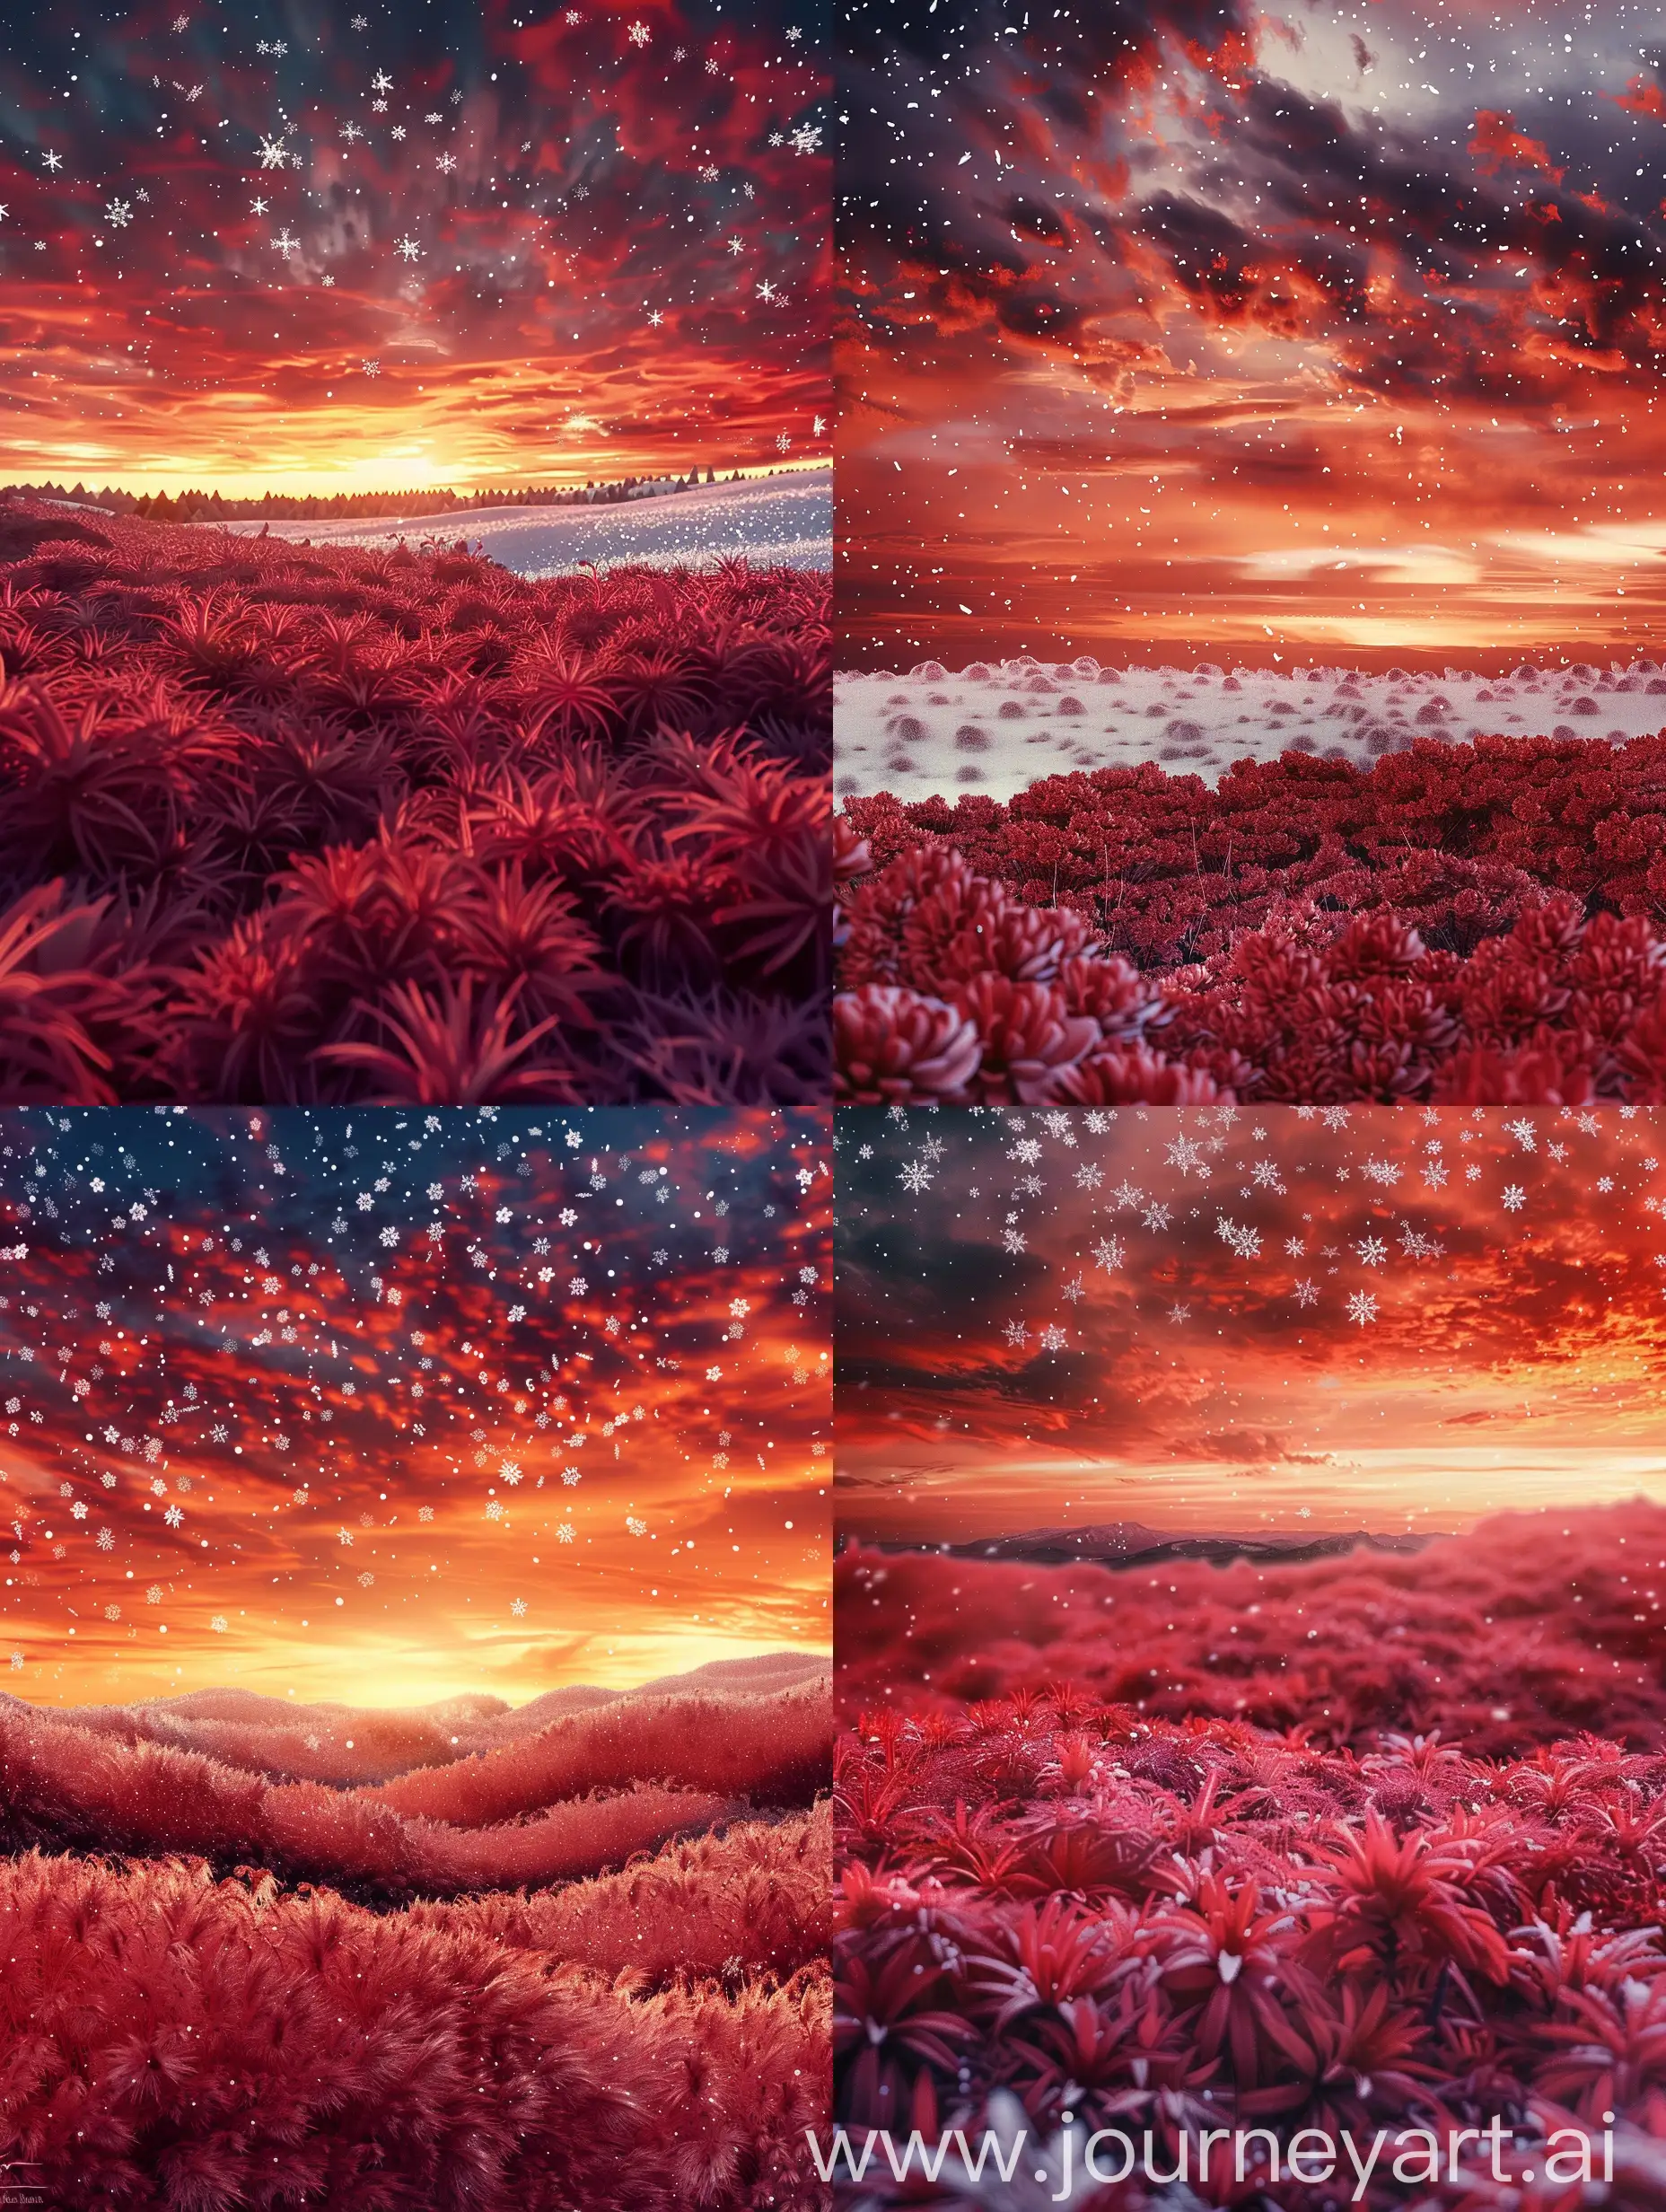  {"prompt":"A serene landscape at dusk featuring a sky painted with vibrant hues of red and orange, resembling a blazing sunset. The ground is covered with a dense layer of unusual, alien-like red flora, giving the impression of a soft, undulating carpet. Above the flowers, delicate snowflakes gently fall, adding a touch of wintry magic to the scene. This juxtaposition of warm and cold elements creates a surreal and enchanting atmosphere, where the viewer can almost feel the crispness of the snow contrasting with the warmth of the sunset.","size":"1024x1024"}
